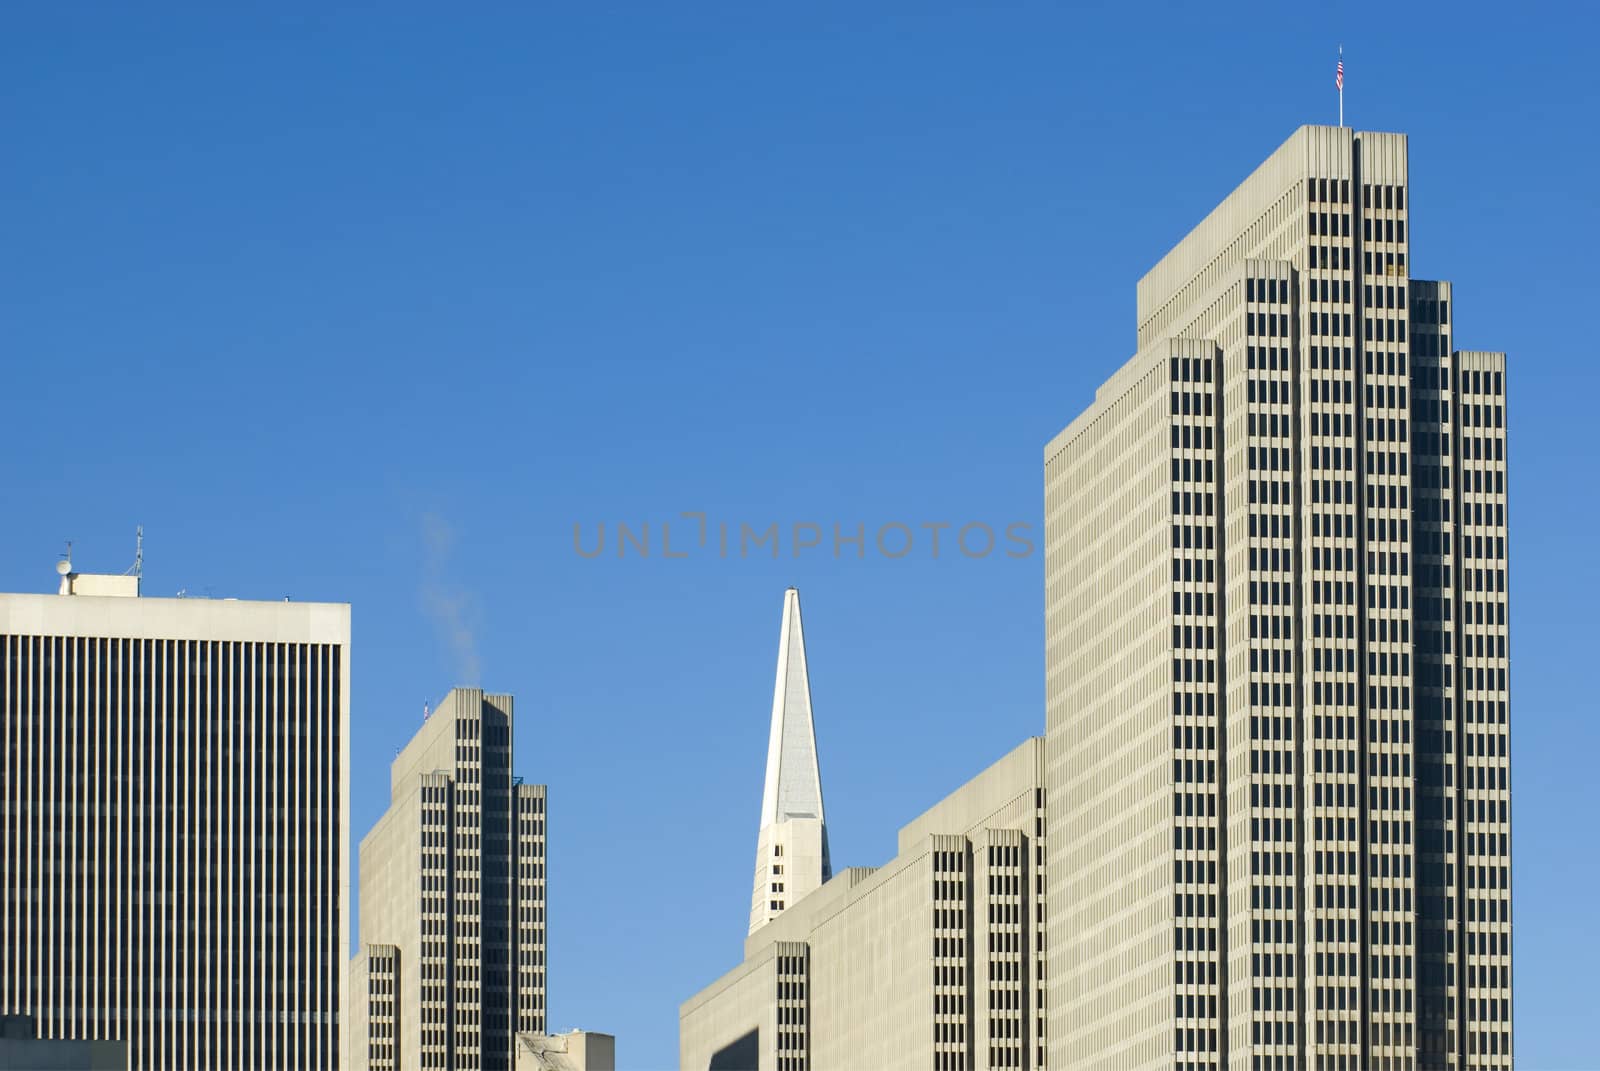 roof shapes of downtown san francisco, transamerica building and the embacadero centre